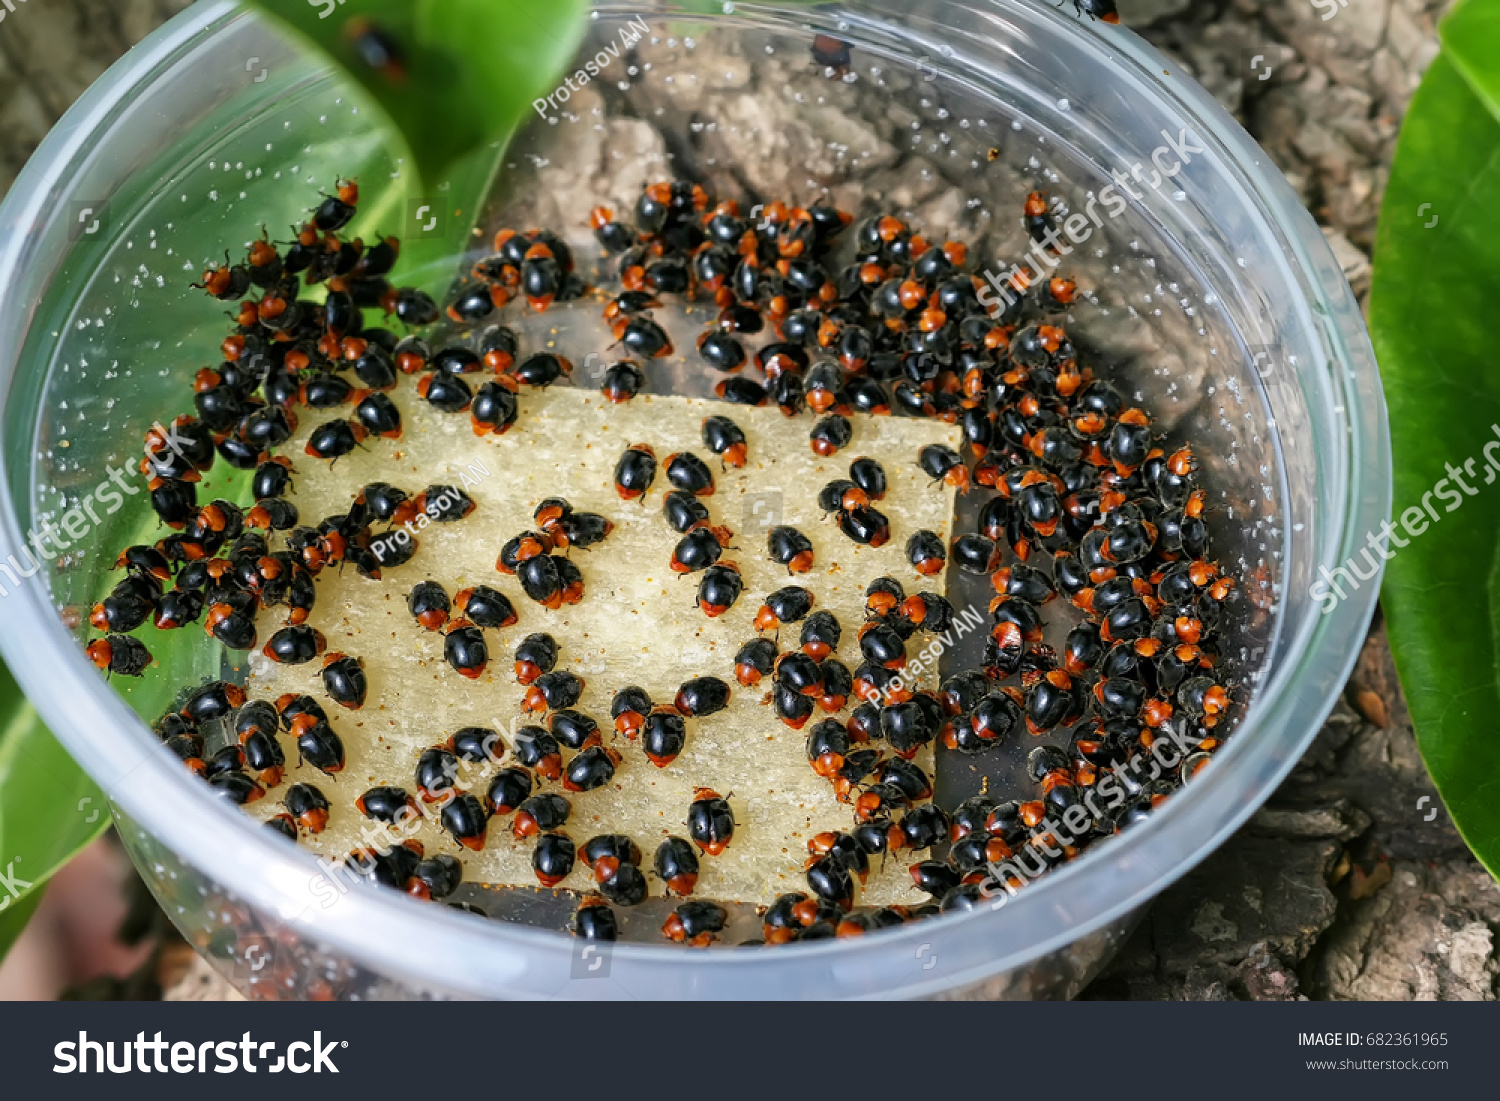 Mealybug ladybirds (Cryptolaemus montrouzieri) are natural enemies of Scale insects. Agriculture plantation. Rearing and biological control concept #682361965